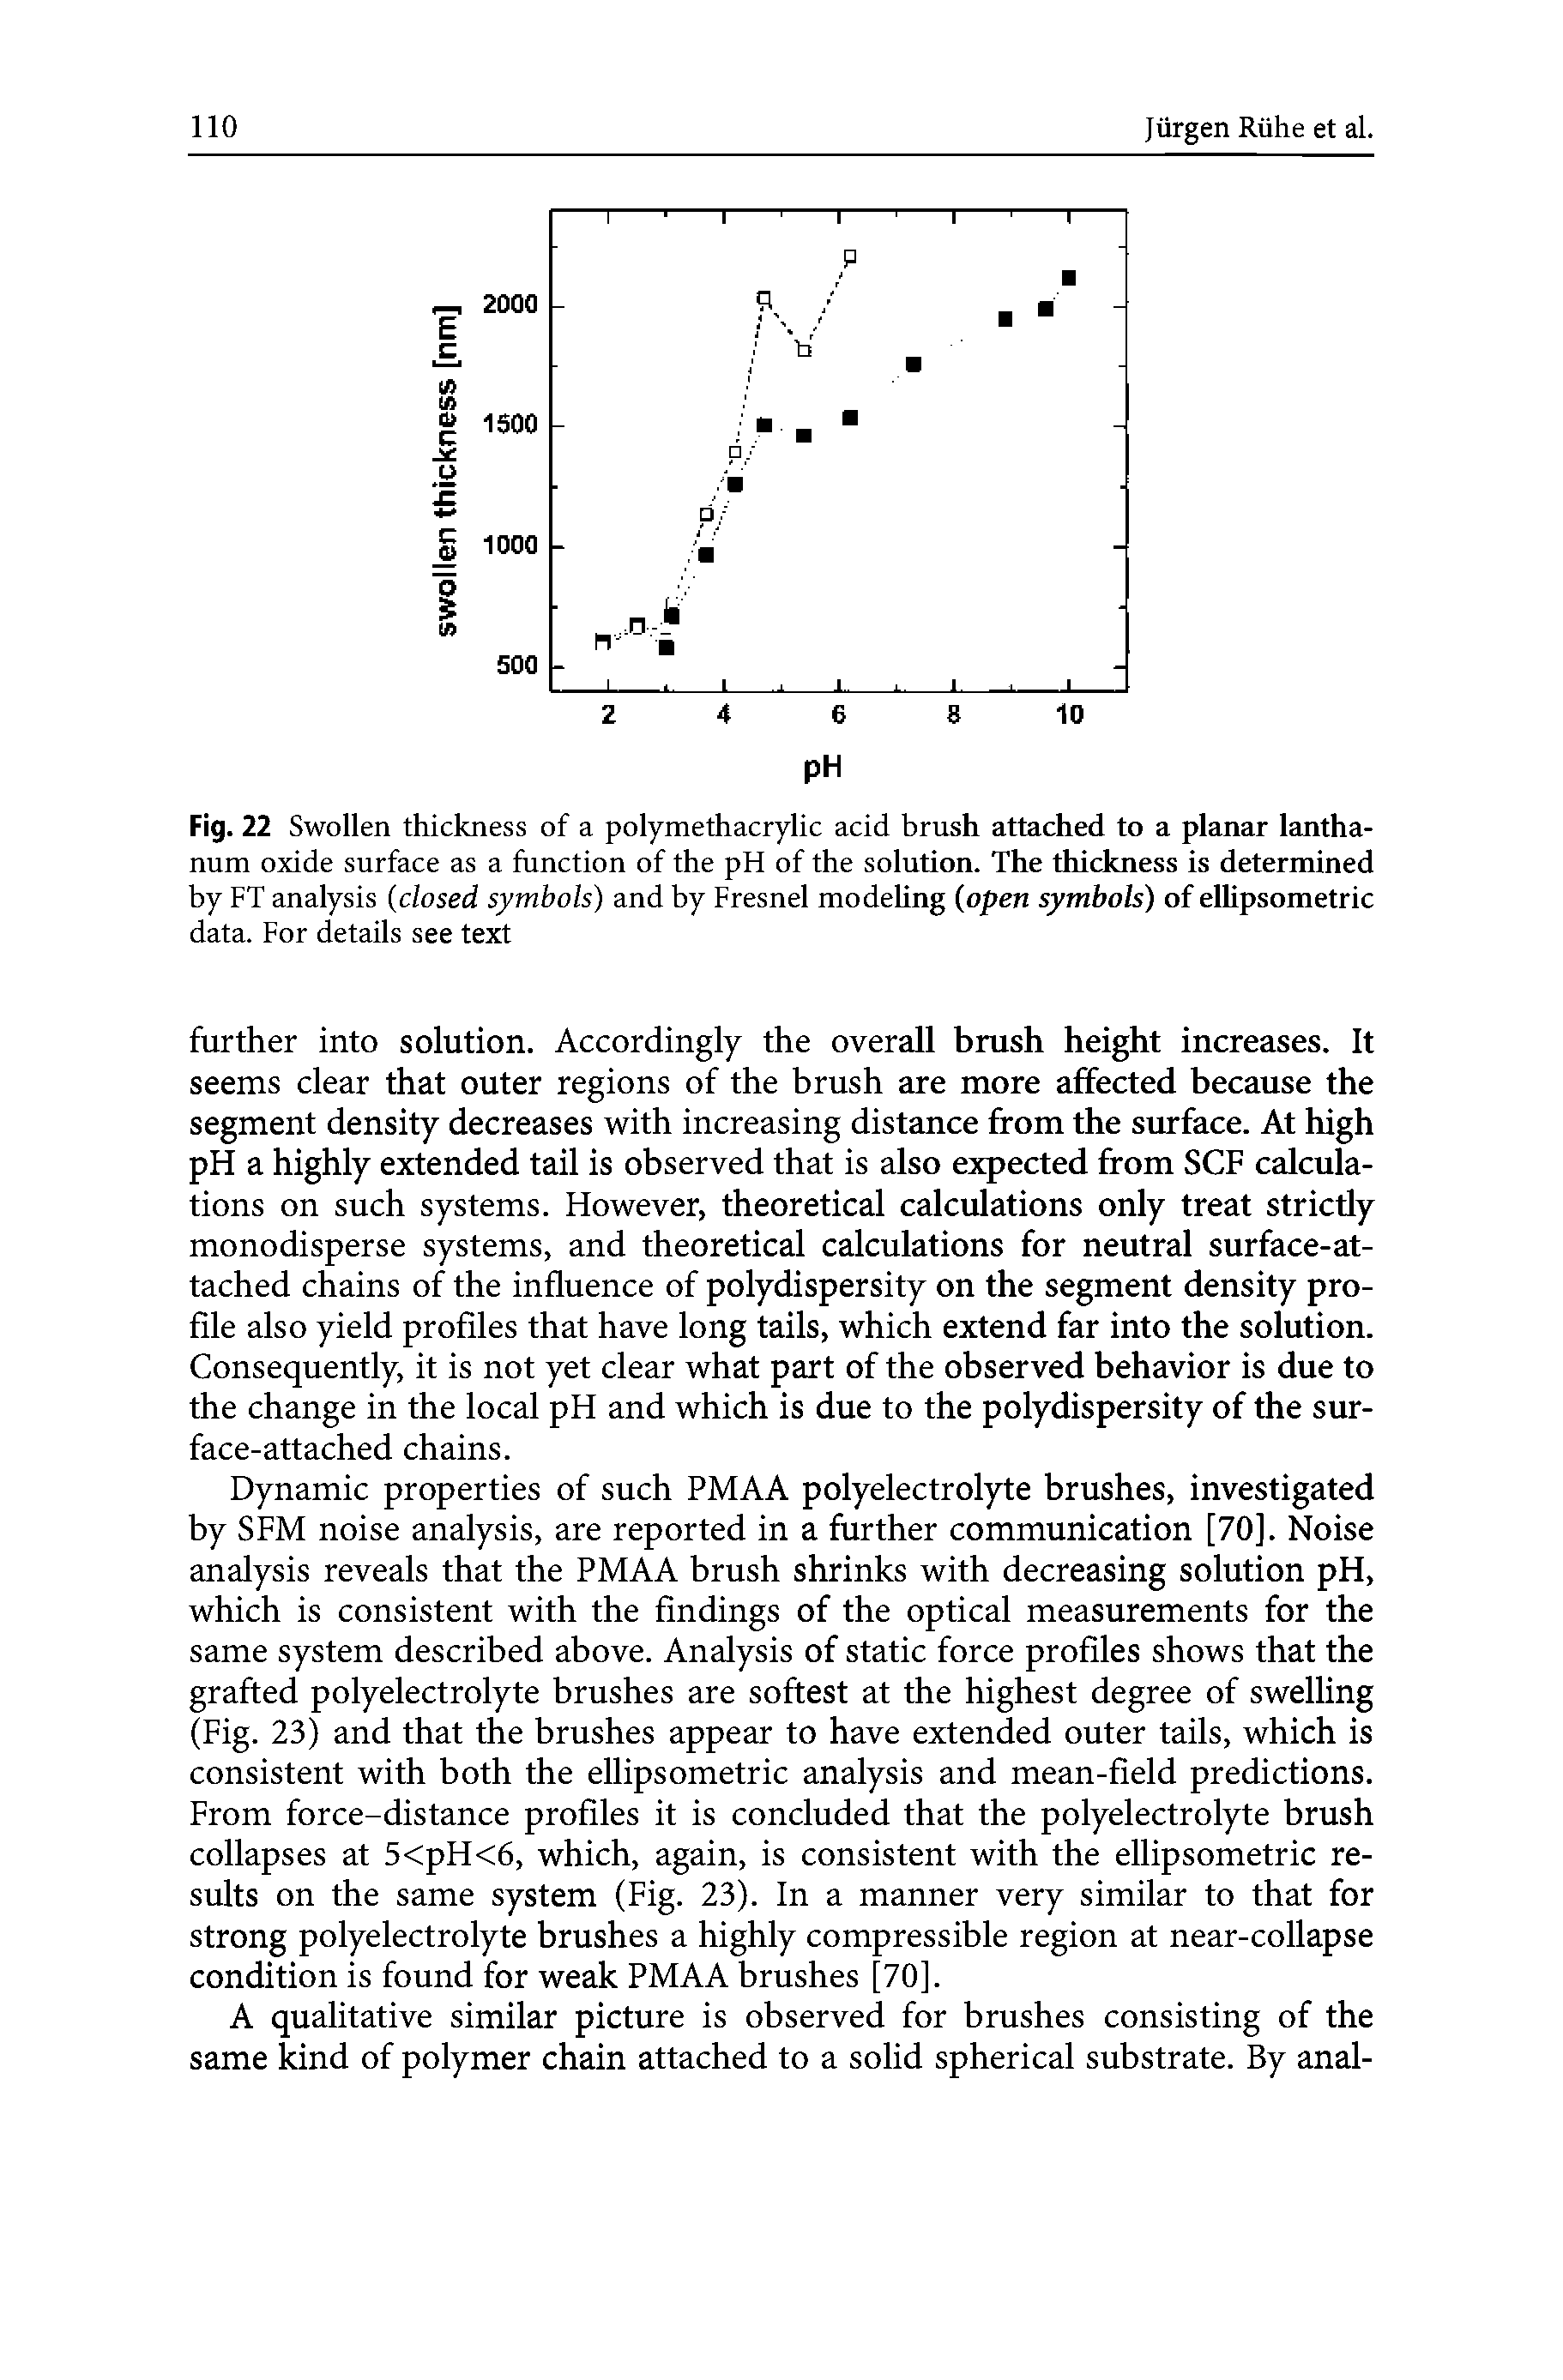 Fig. 22 Swollen thickness of a polymethacrylic acid brush attached to a planar lanthanum oxide surface as a function of the pH of the solution. The thickness is determined by FT analysis (closed symbols) and by Fresnel modeling (open symbols) of ellipsometric data. For details see text...